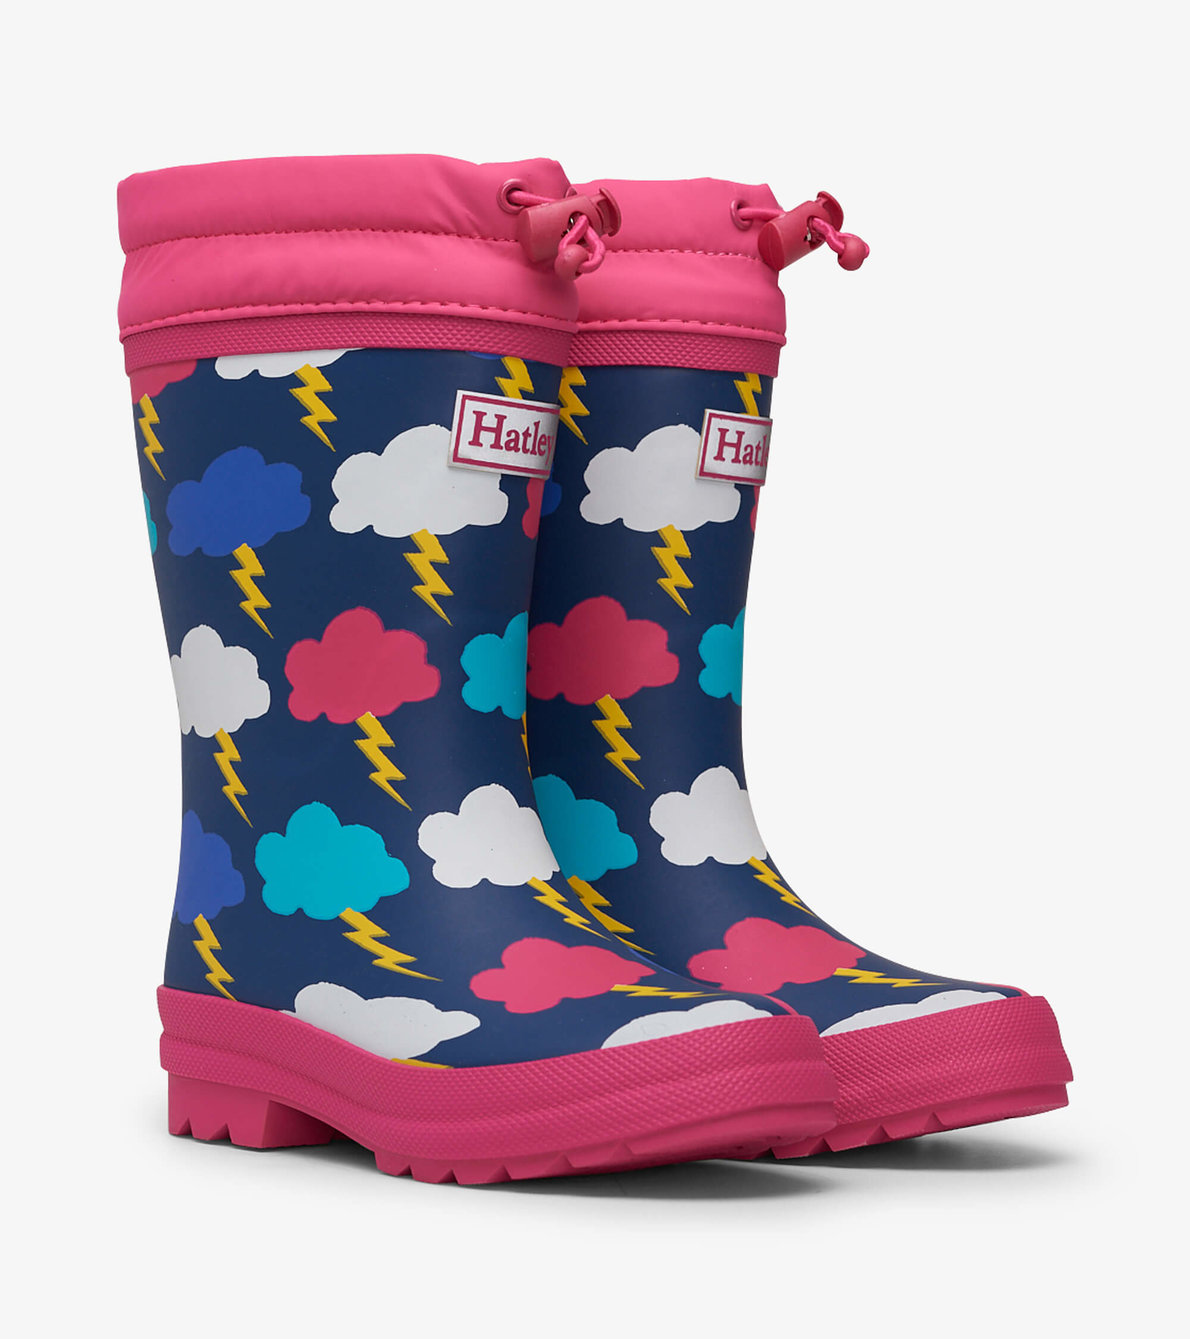 View larger image of Lightning Clouds Sherpa Lined Rain Boots